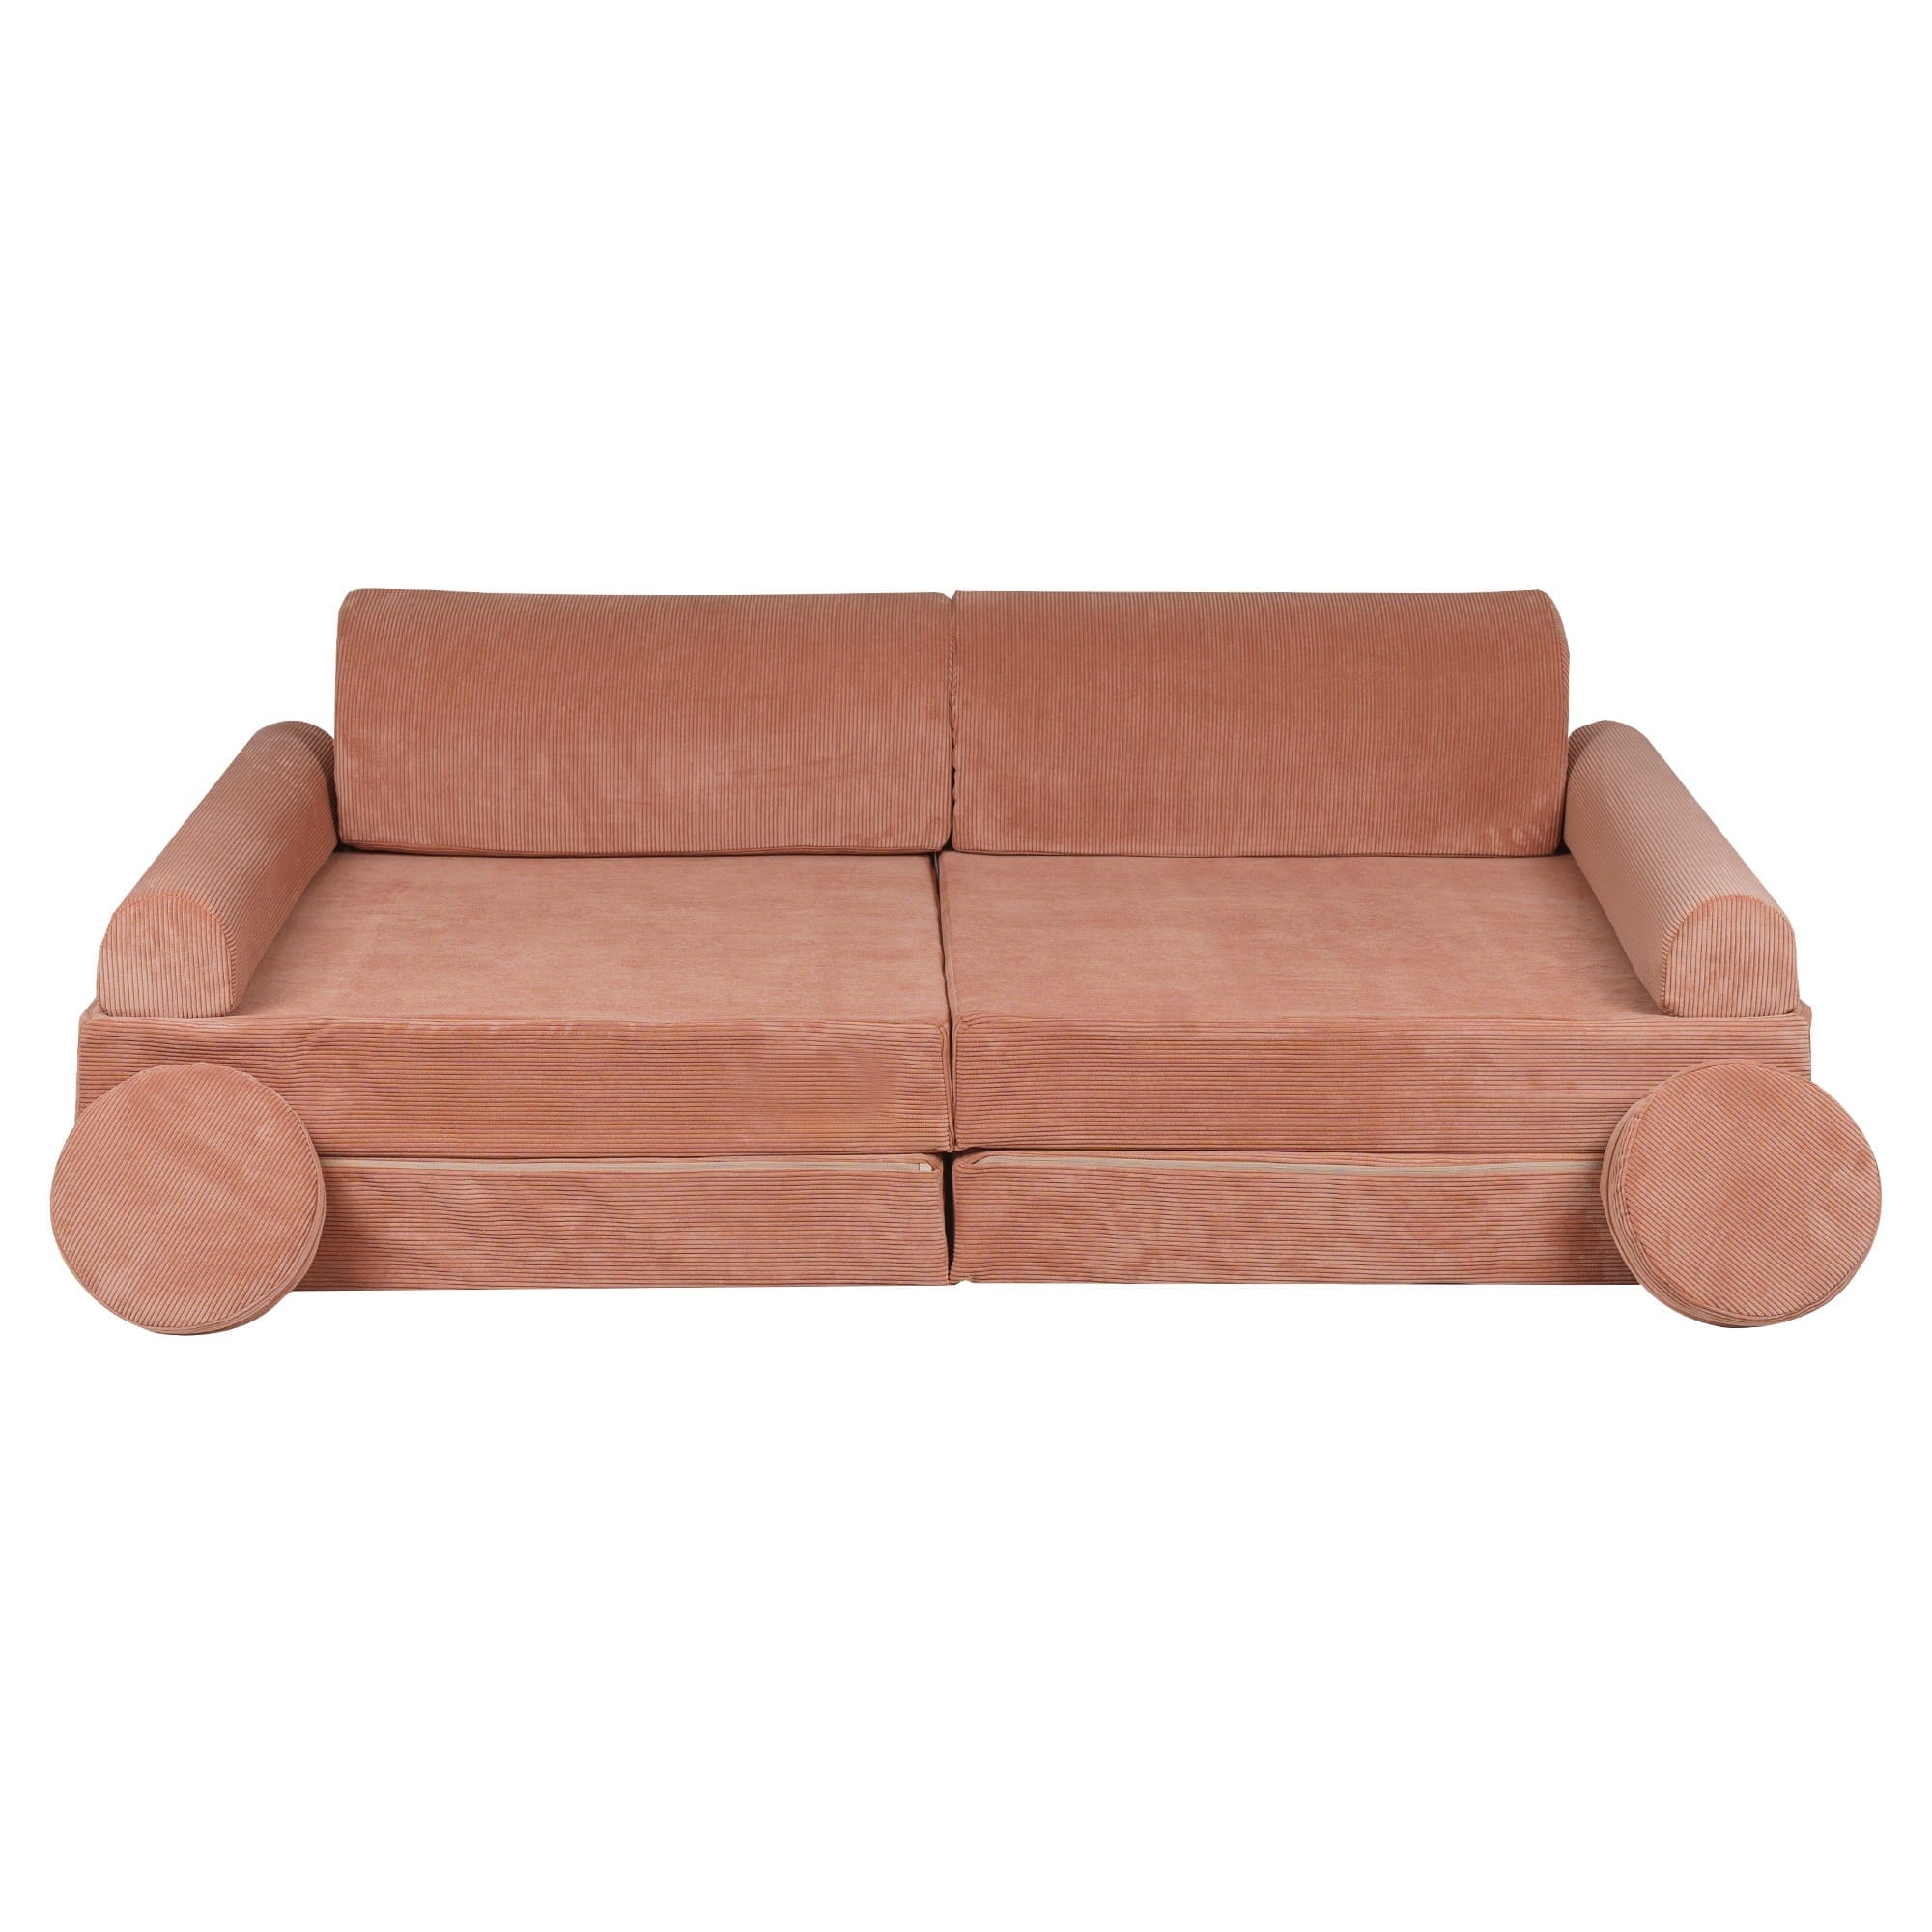 Luxury Corduroy Sofa For Kids By MeowBaby